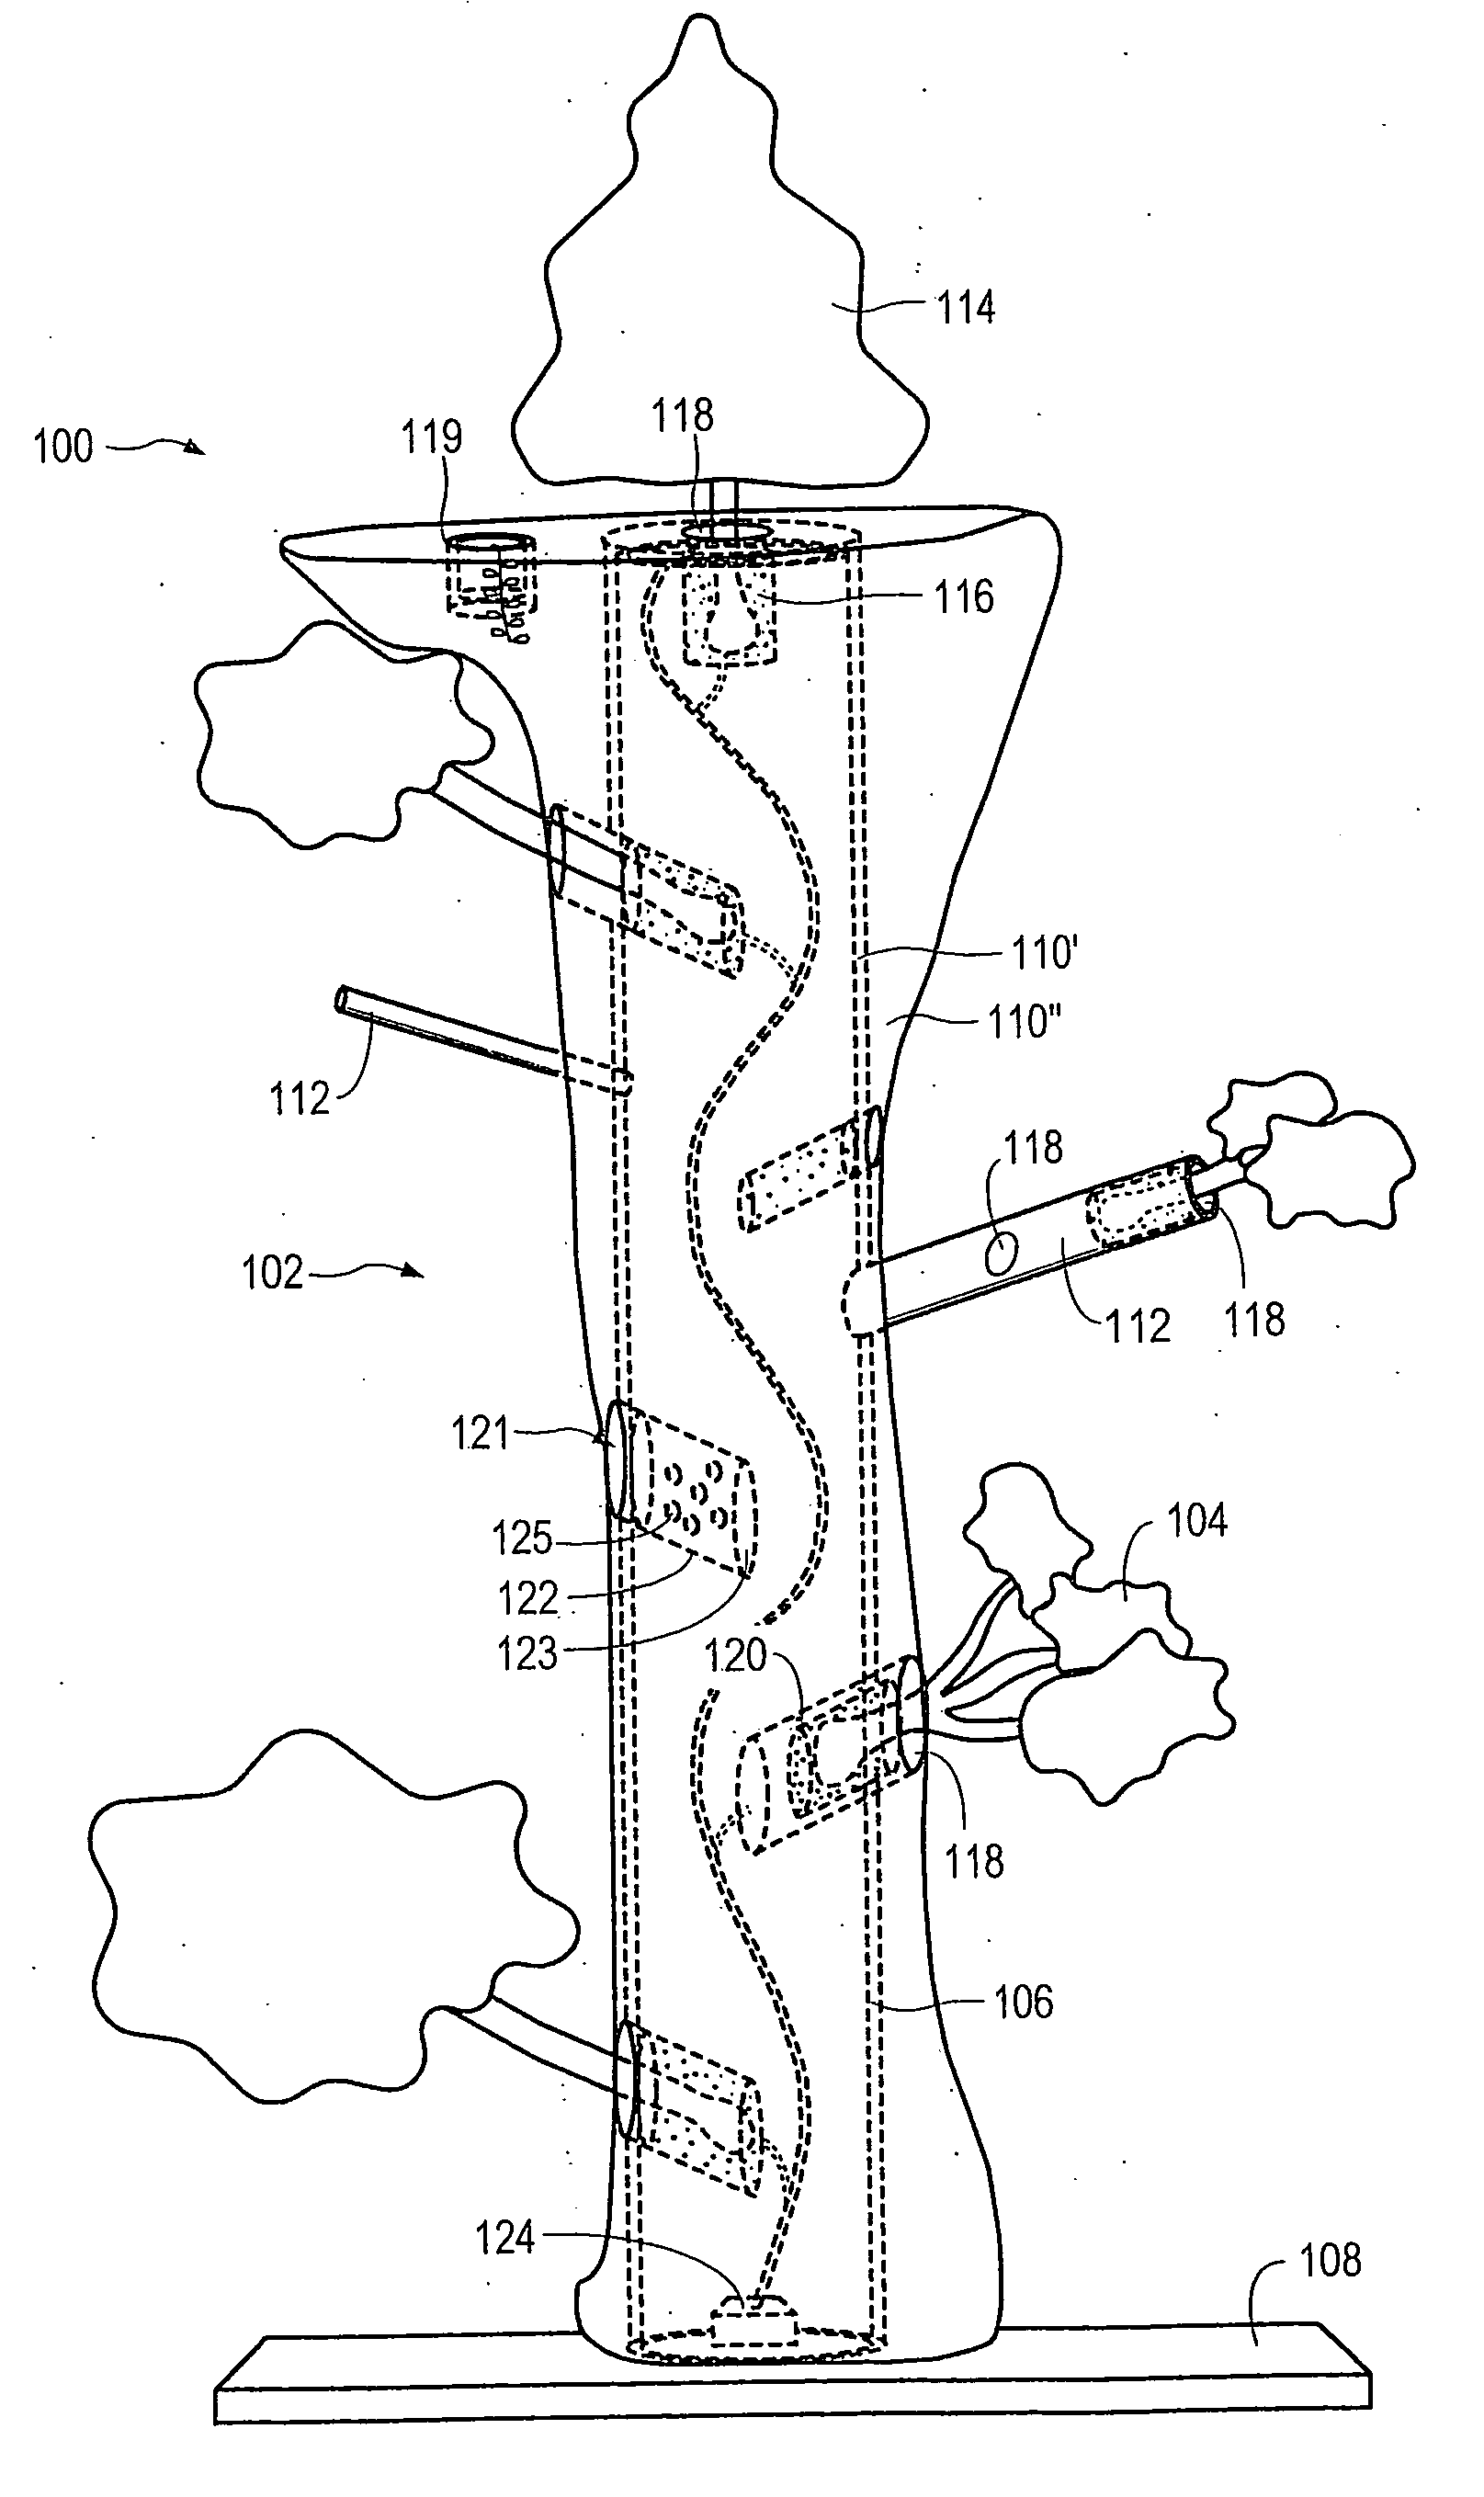 Tree with covering apparatus